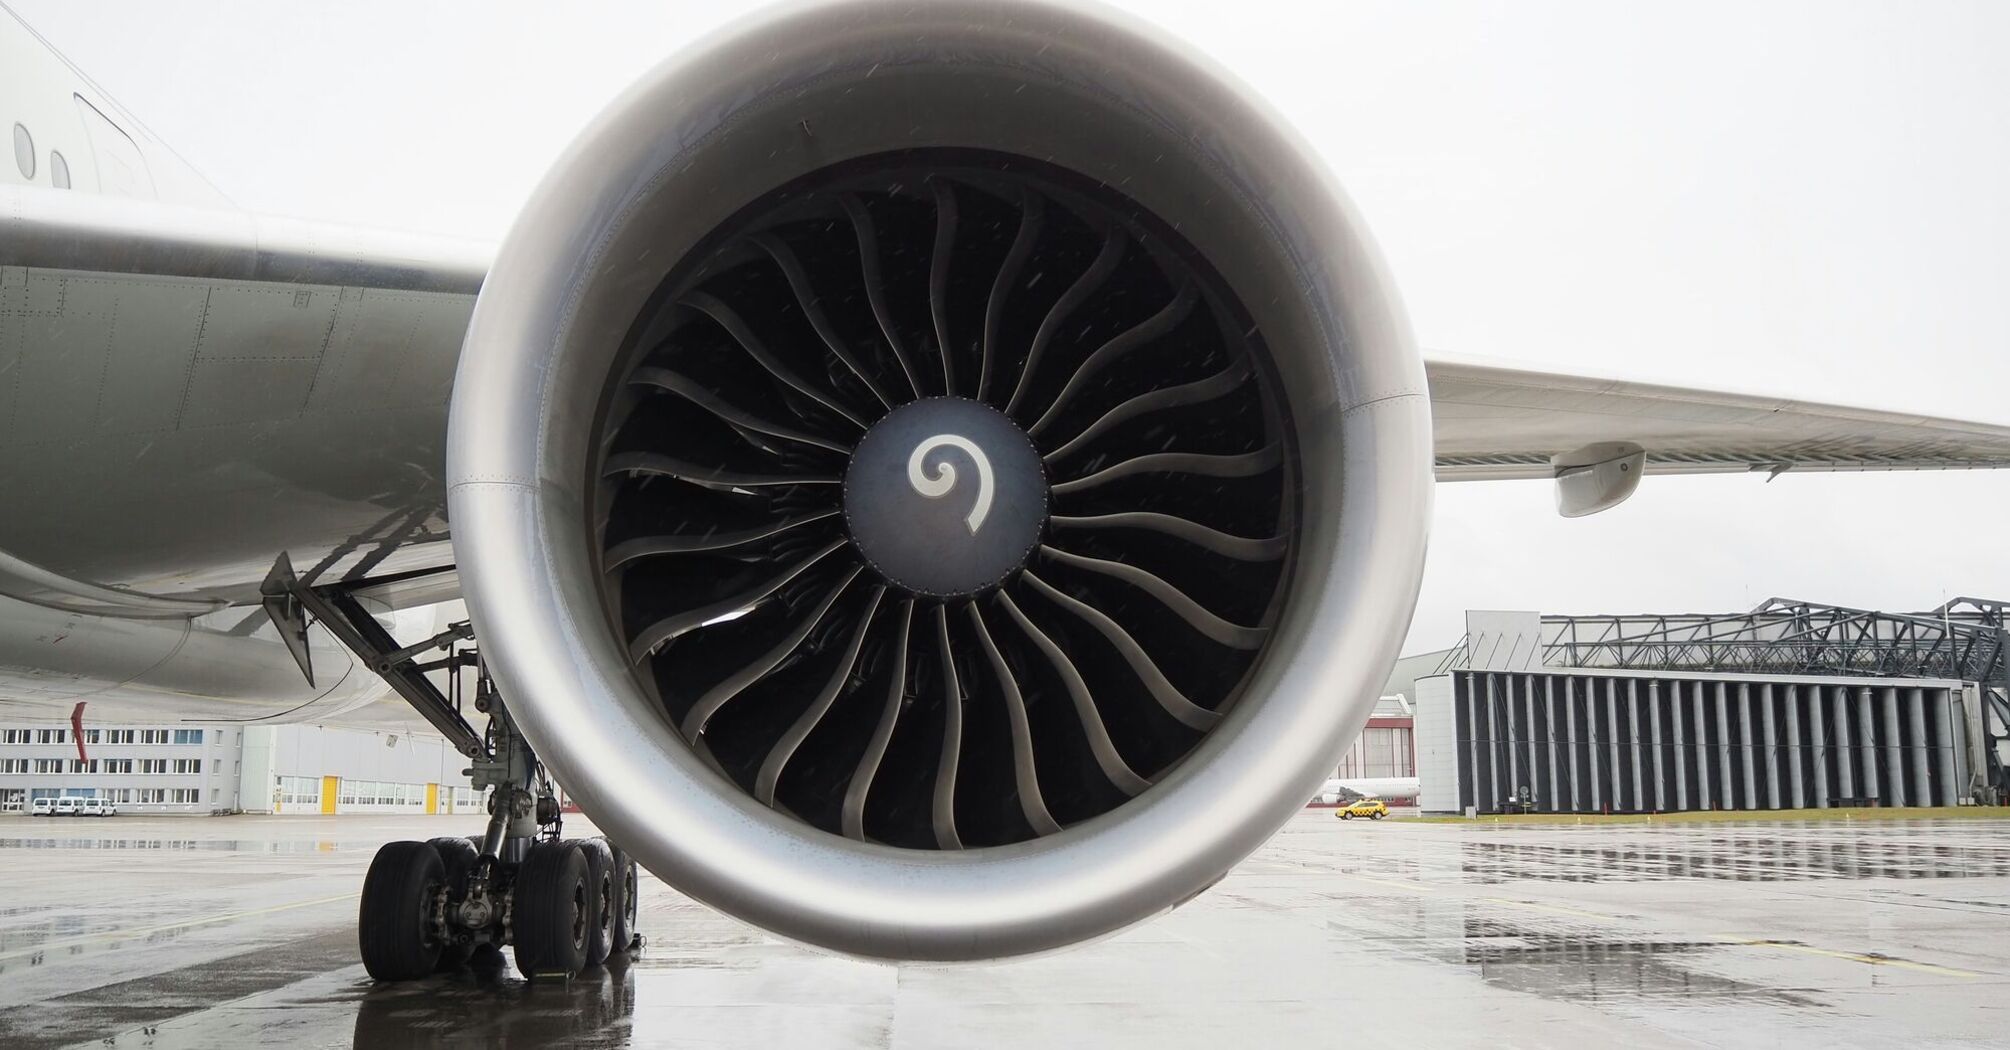 Close-up view of a jet engine on an aircraft wing, parked at an airport on a wet tarmac with airport structures in the background